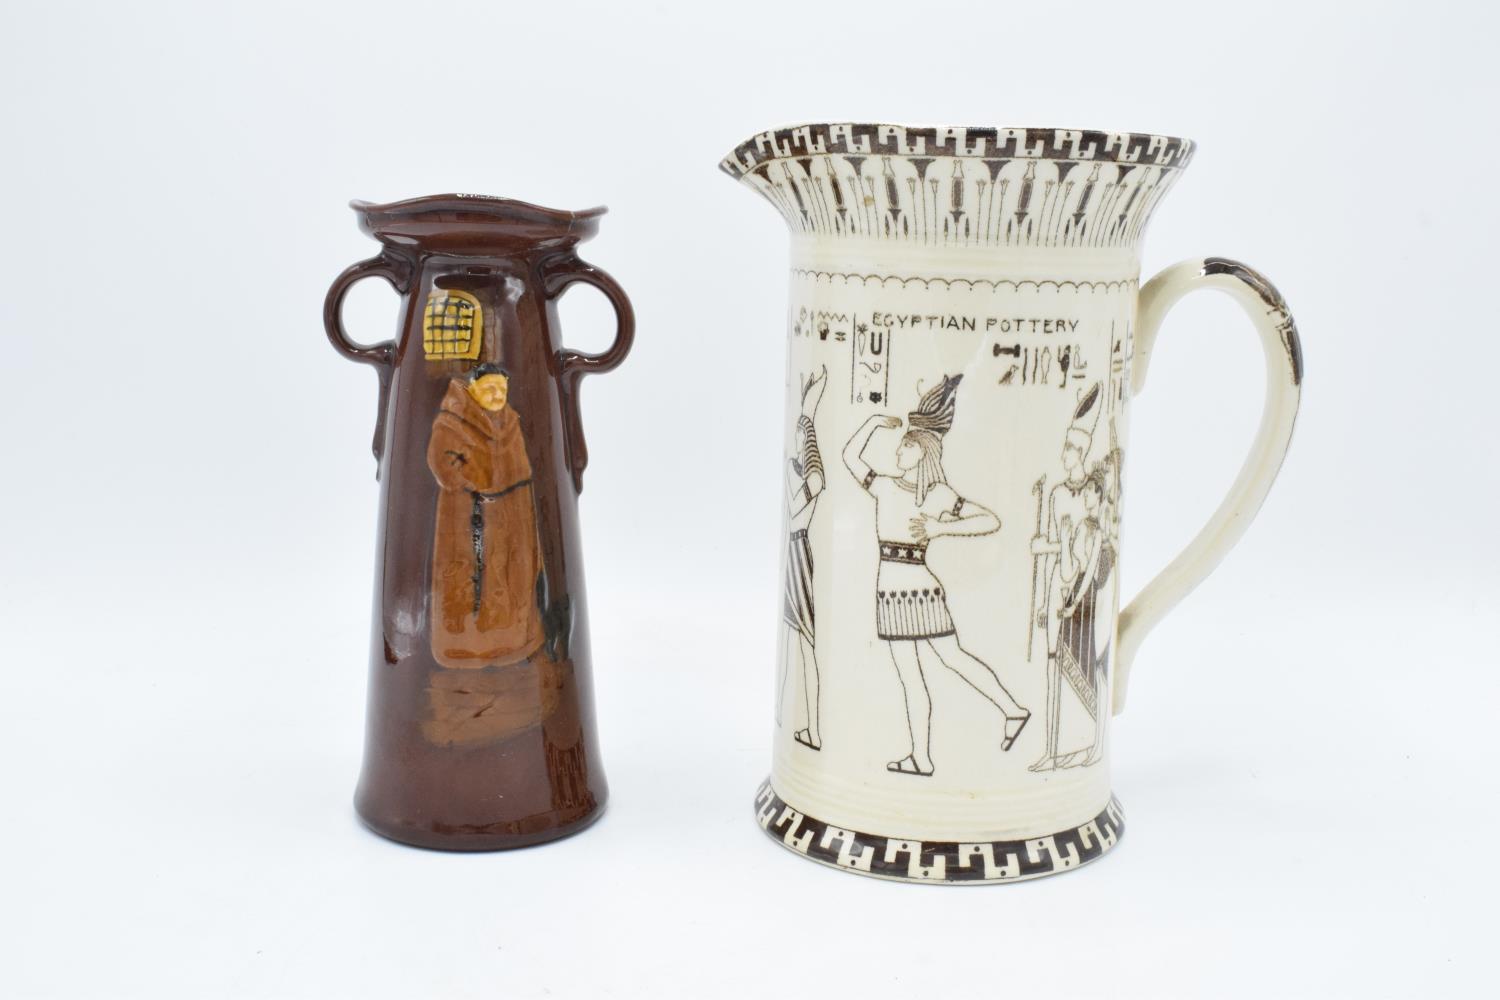 Royal Doulton Kingsware Monk in the Cellar and Egyptian series ware vase (2). Monks vase a/f,